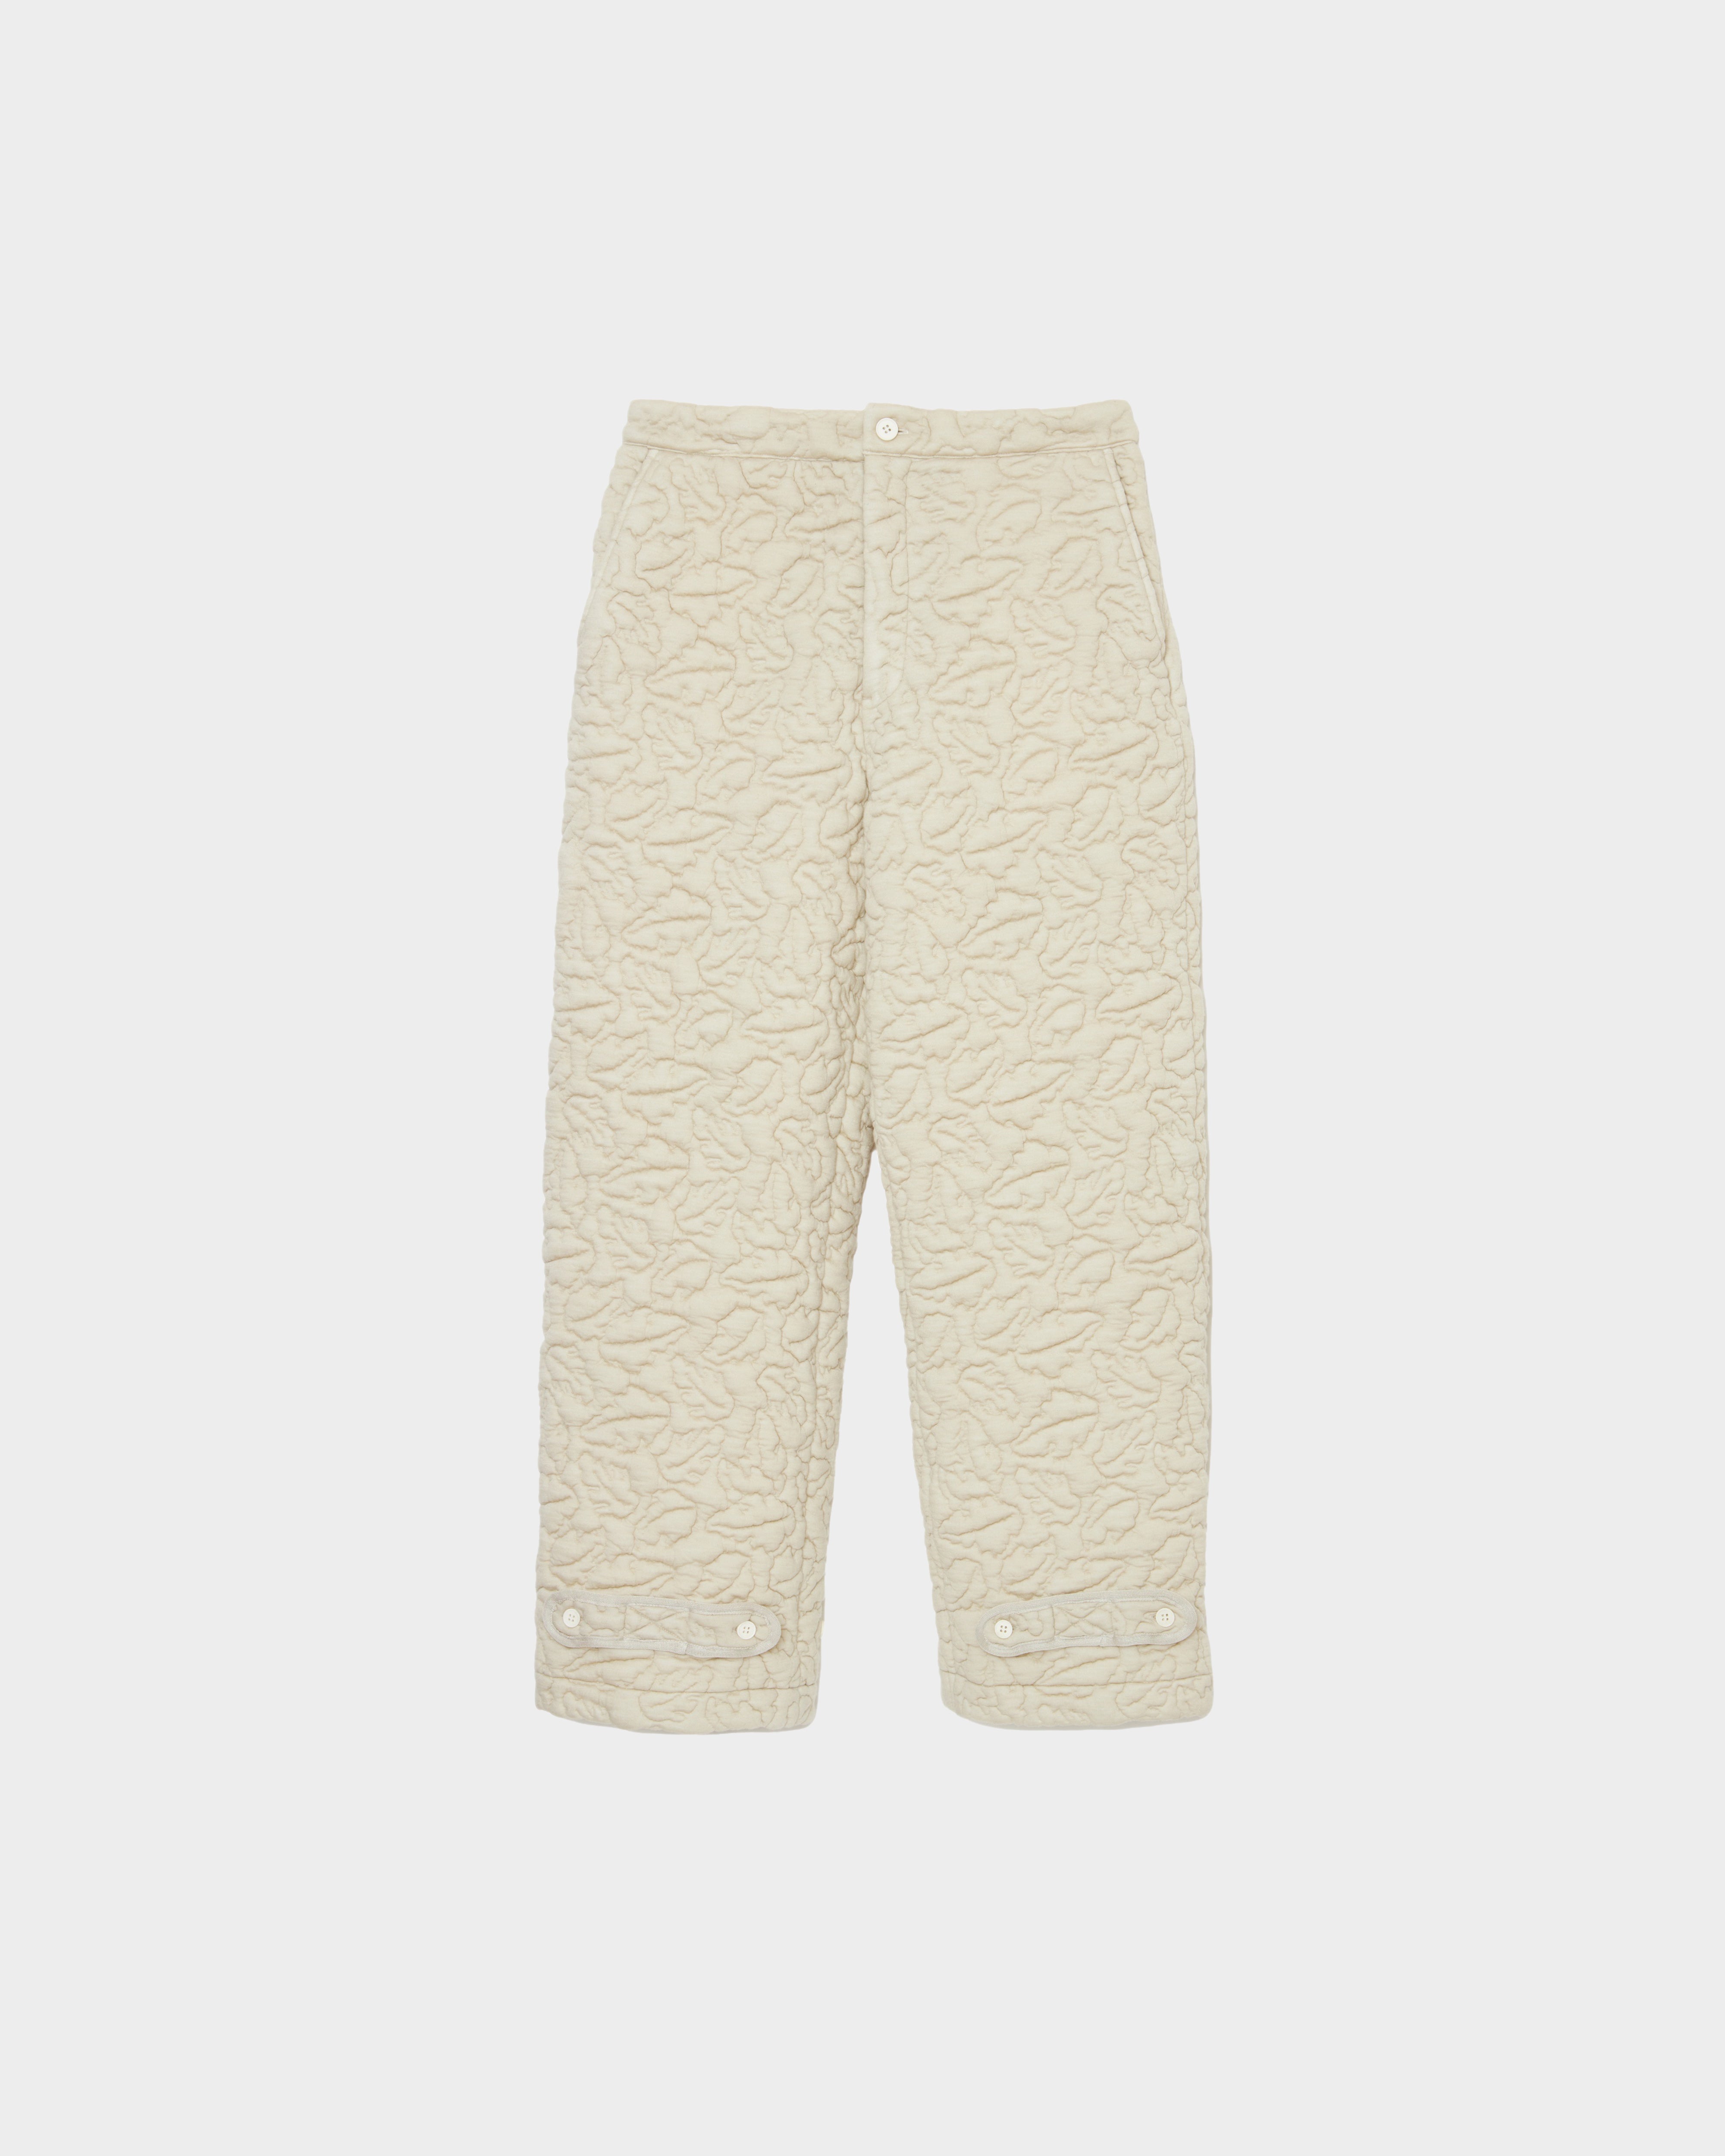 MATSUFUJI / Leaves Quilted Jacquard Trousers 